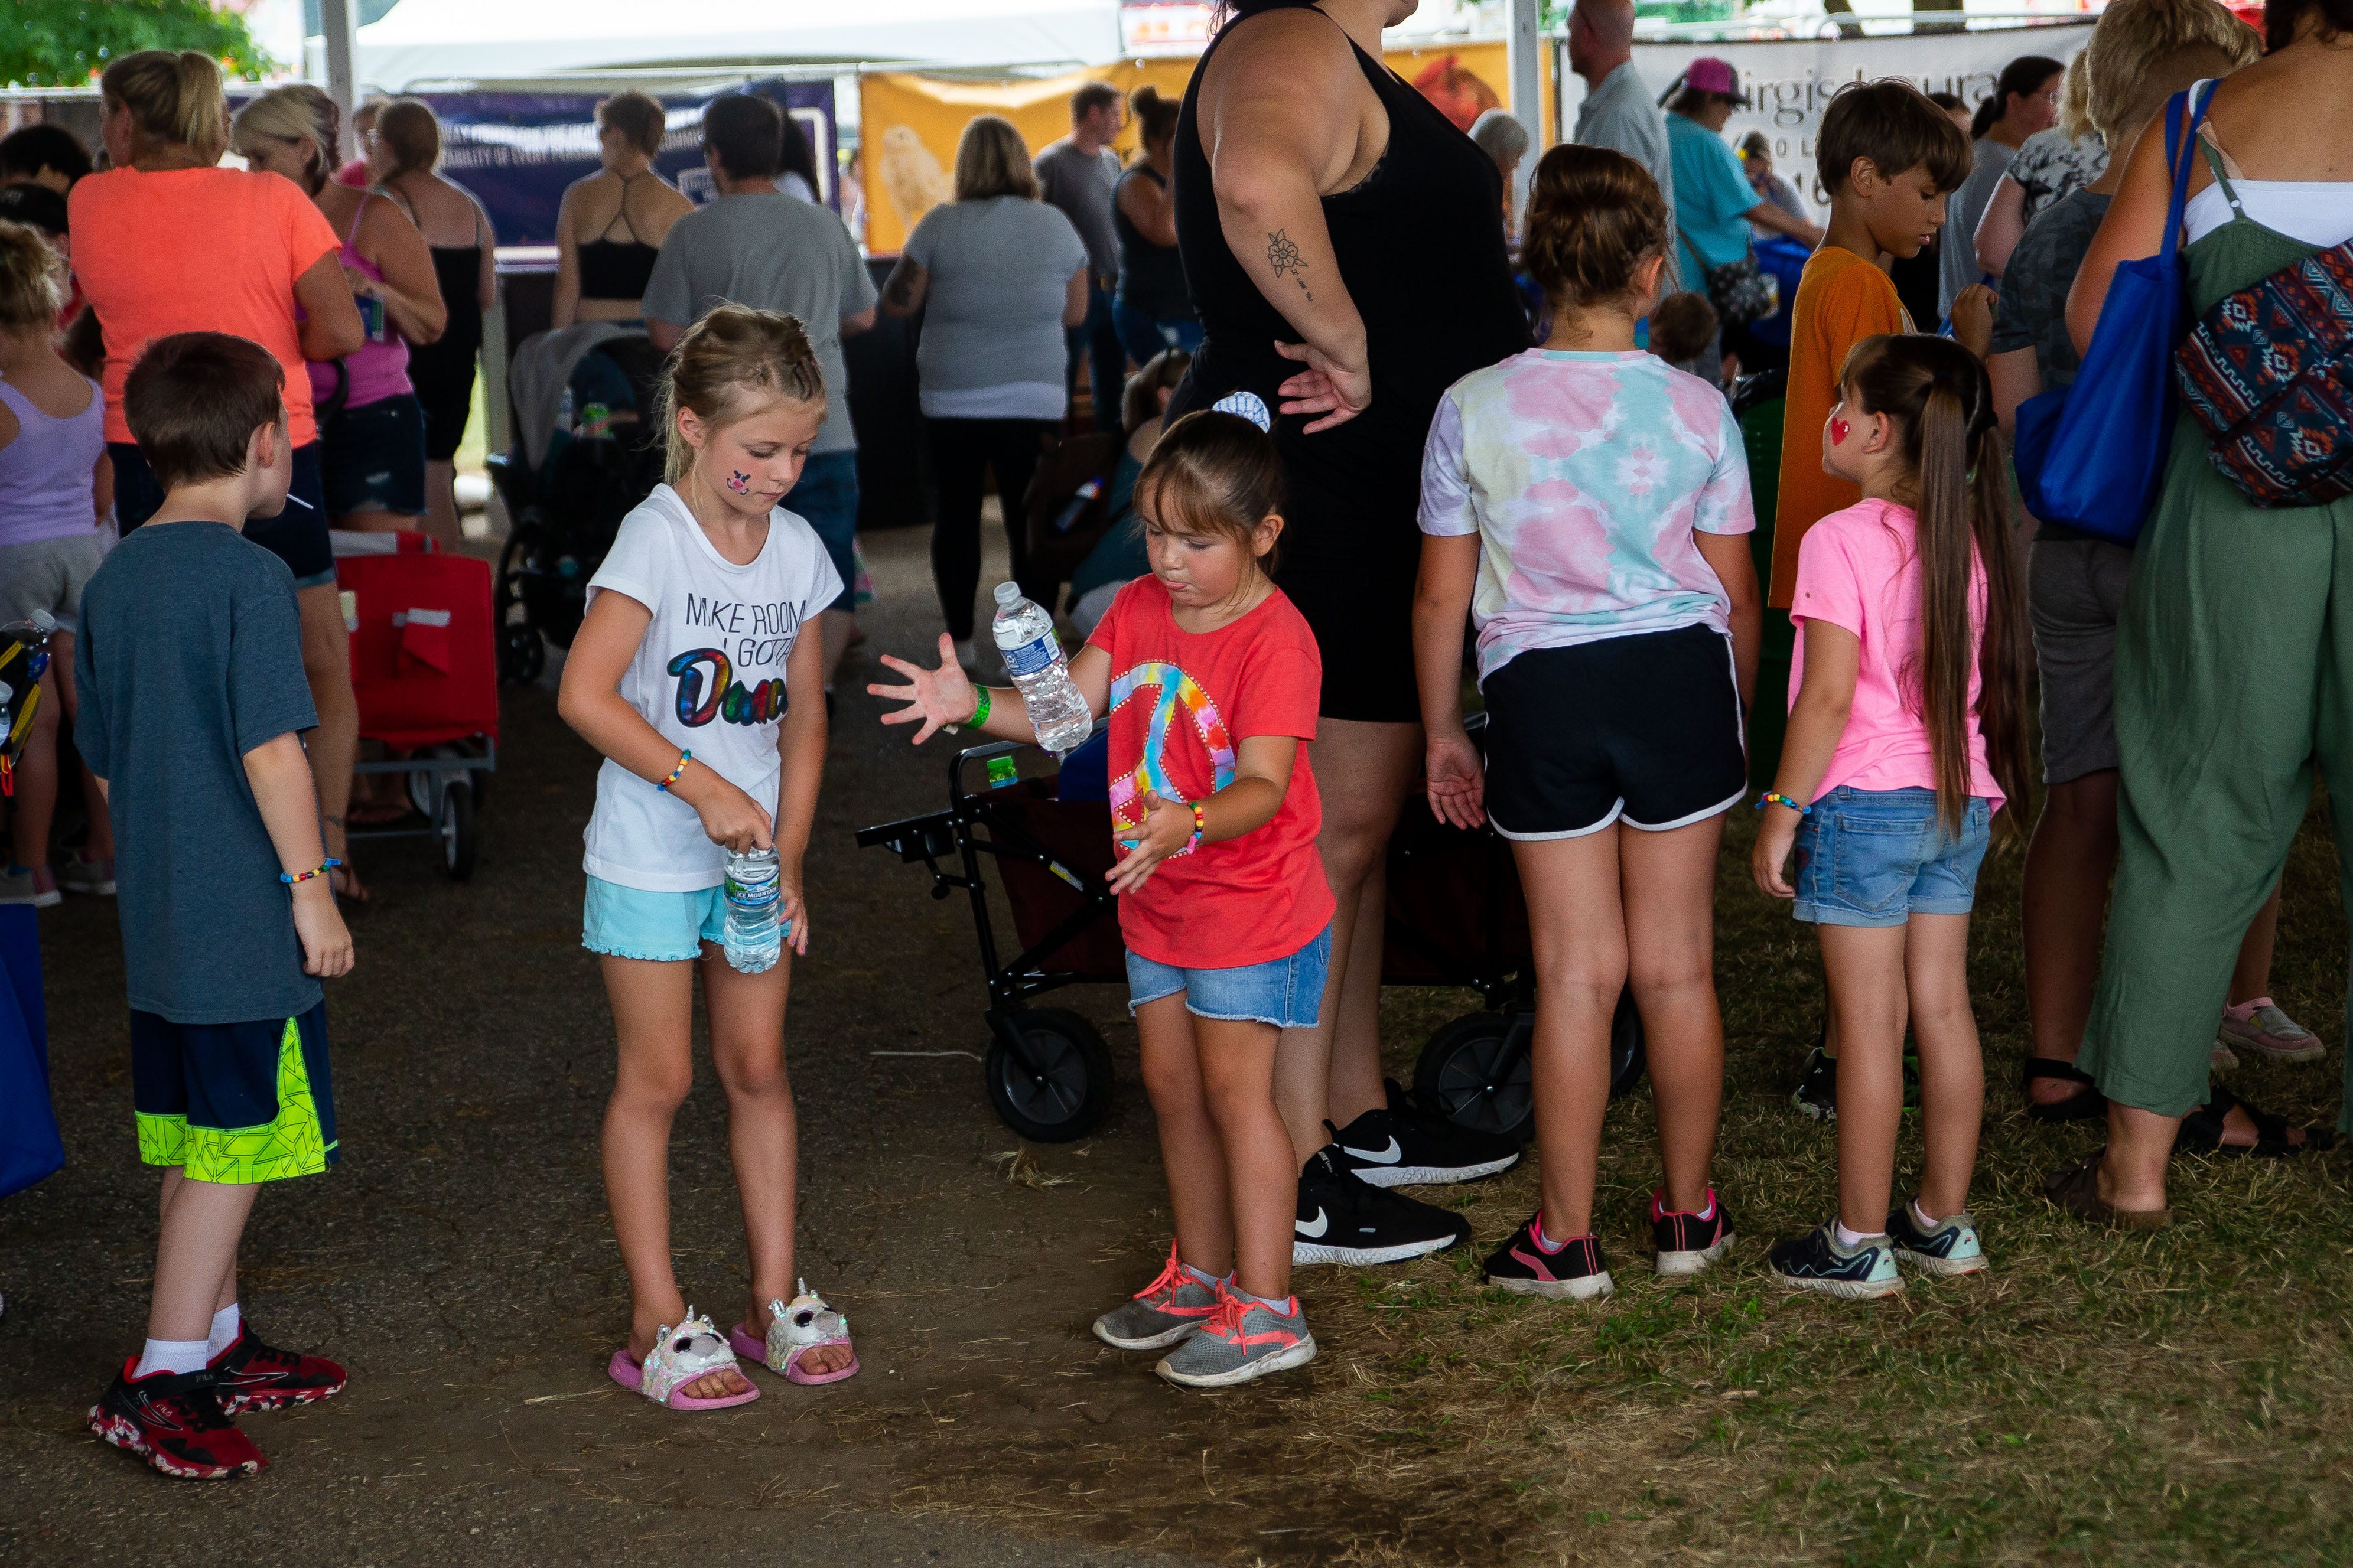 Children flip their water bottles while they wait in line for a balloon animal Tuesday, July 19, 2022, at the Ionia Free Fair. Hundreds of families gather for games, activities and more during Kids Day at the Free Fair.